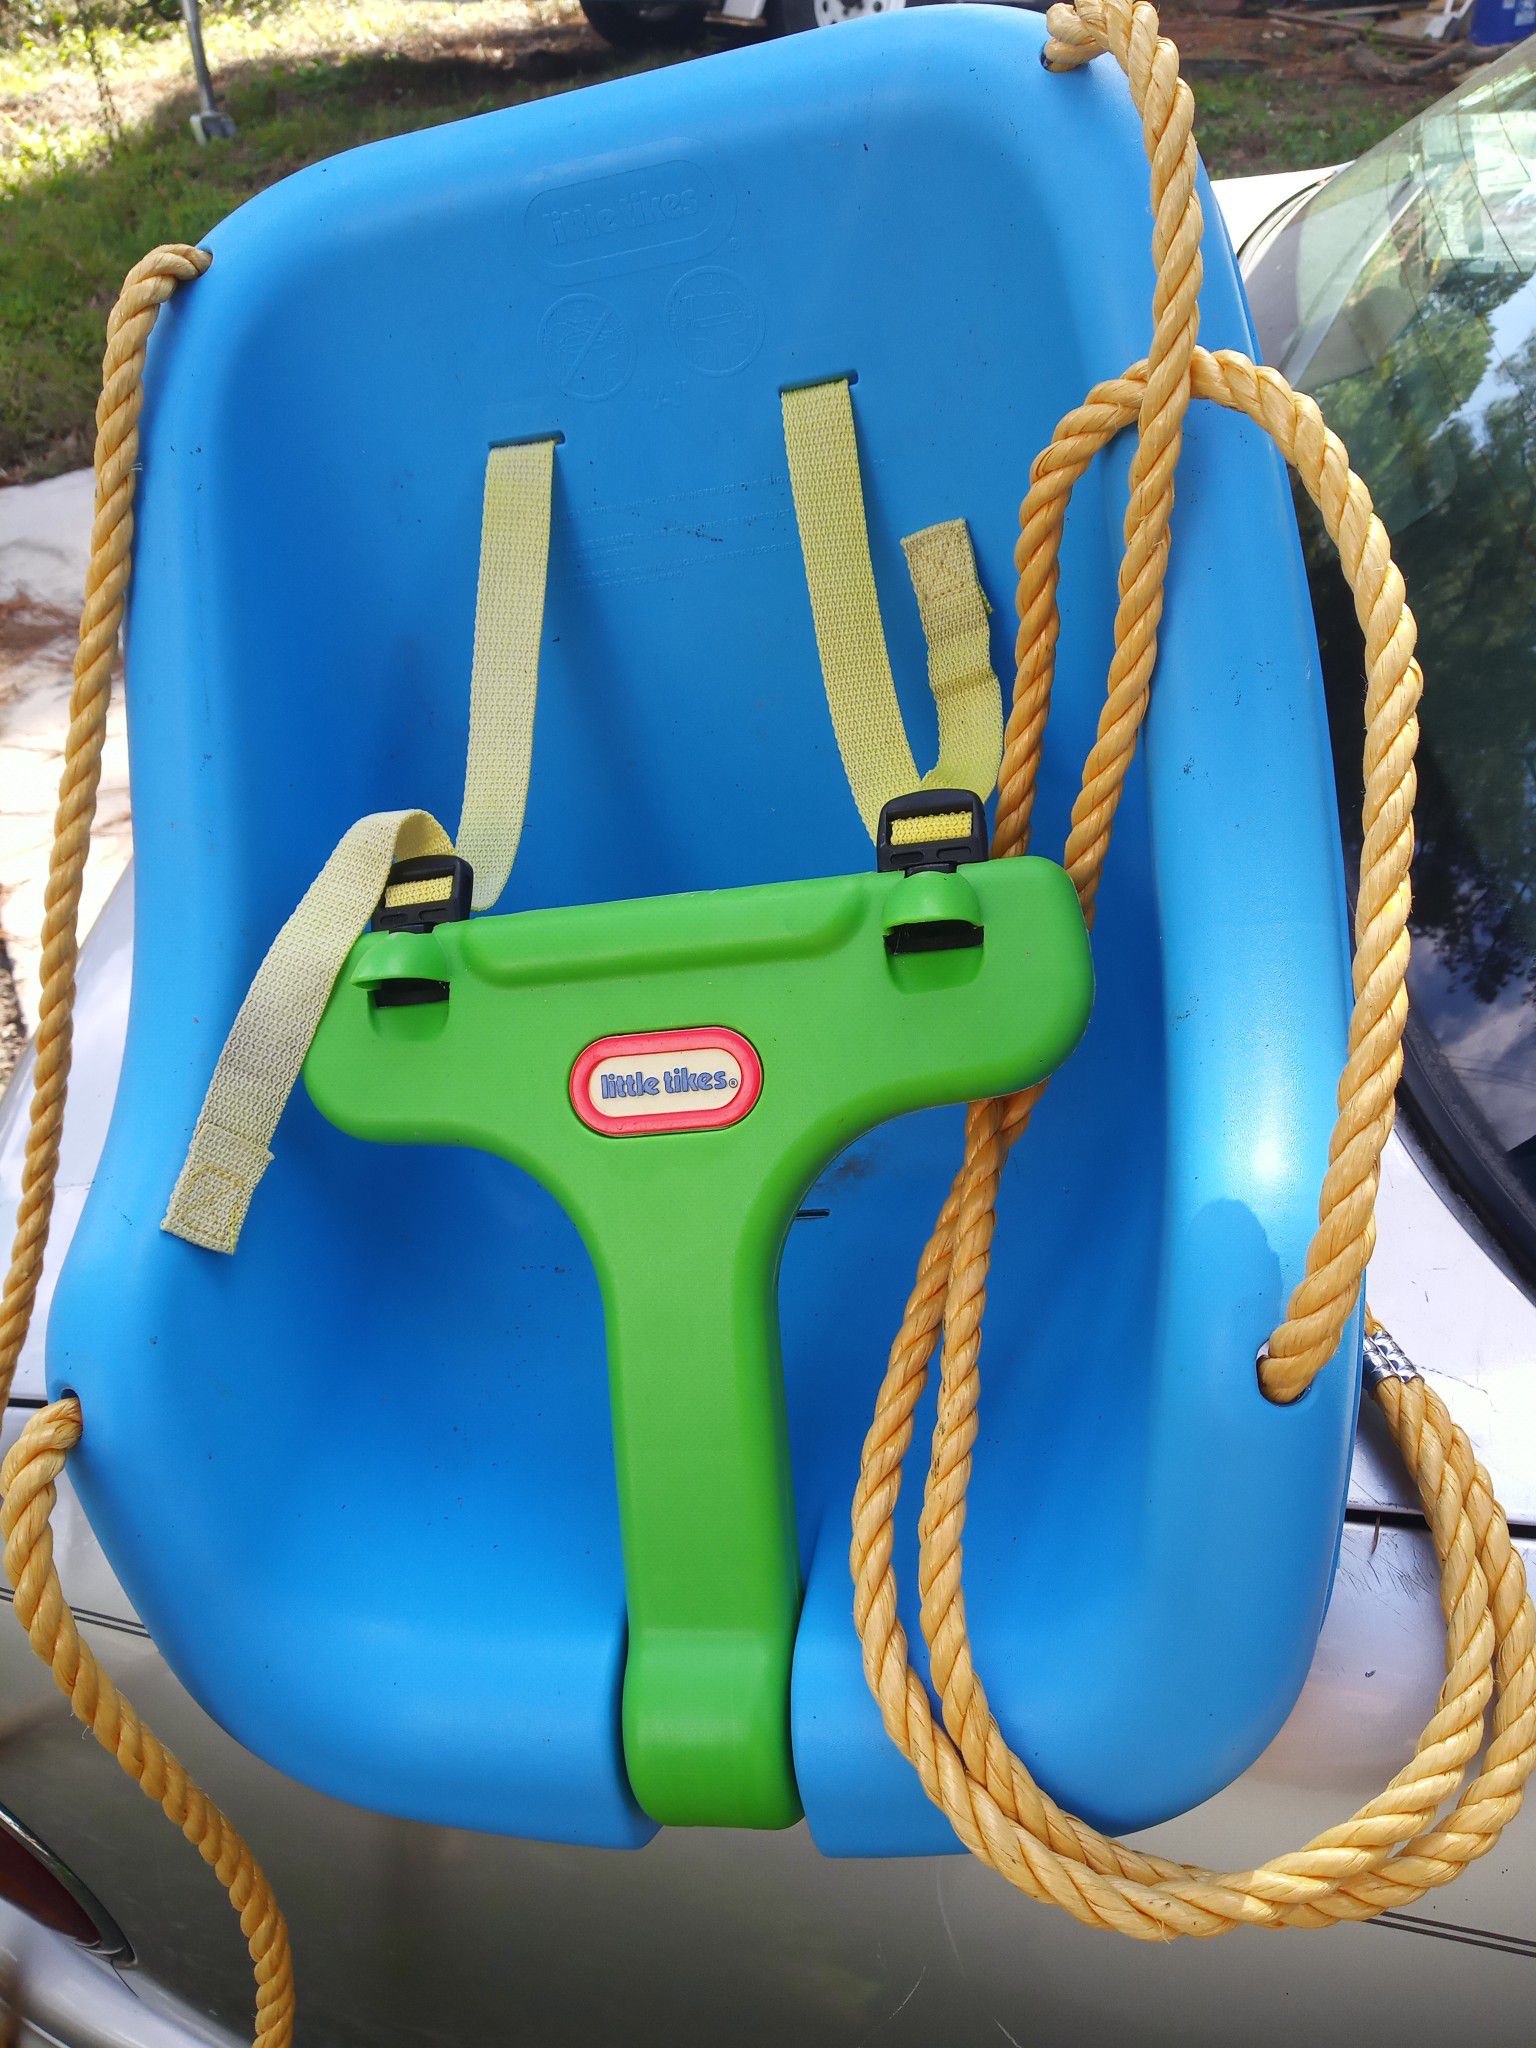 Little Tikes Swing With Two Hooks To Hang And Seat Has Buckle In Straps To Hold Child Safe And Secure